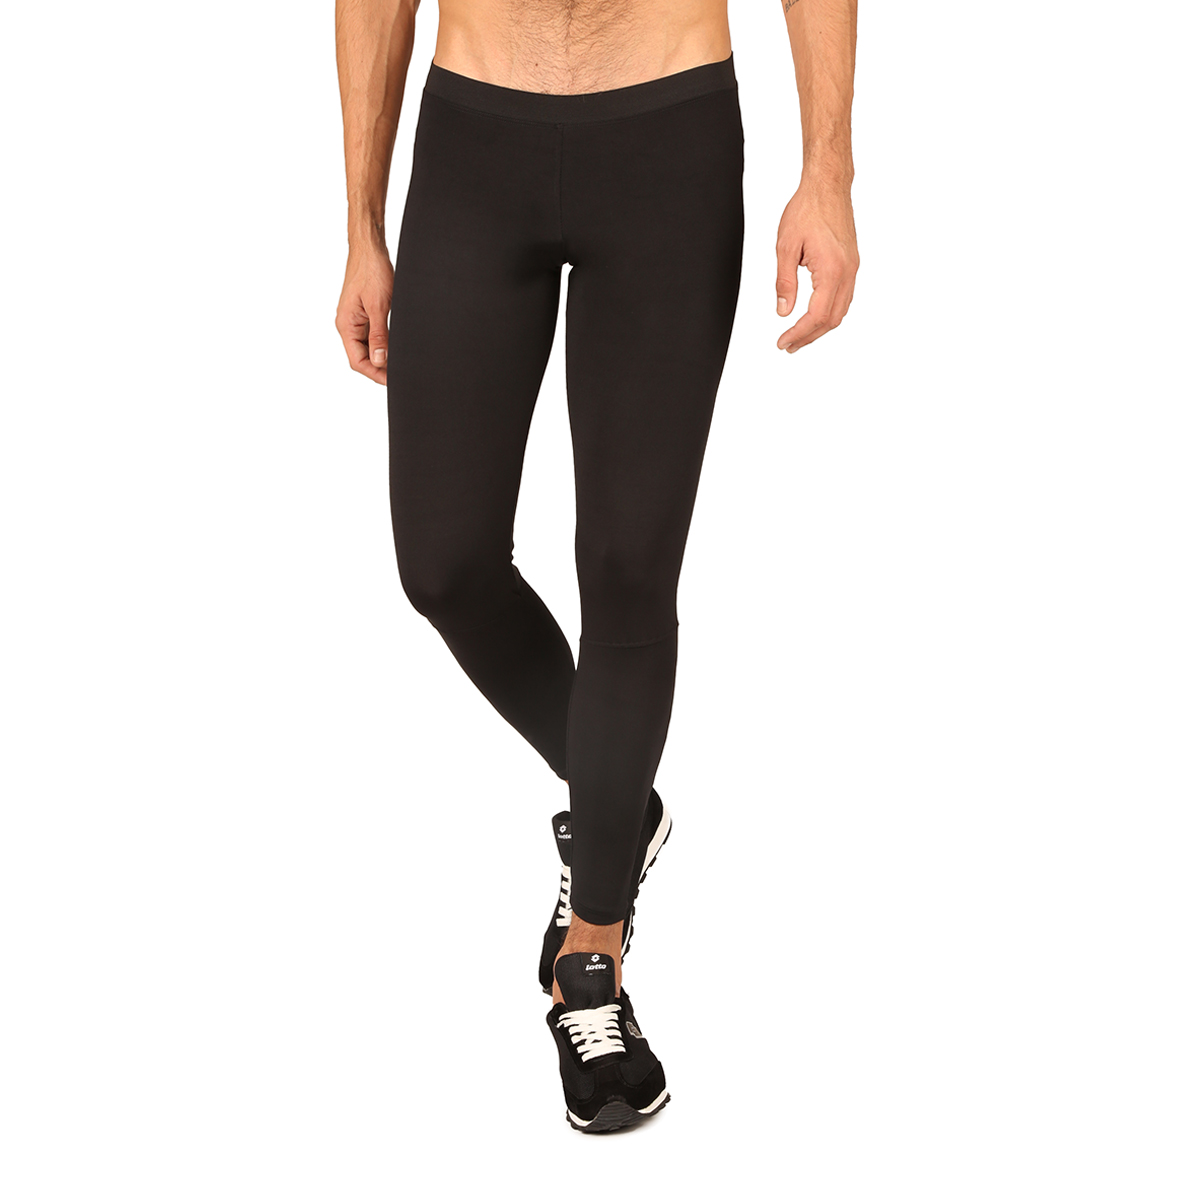 Calza Lotto Larga Compression Hombre,  image number null